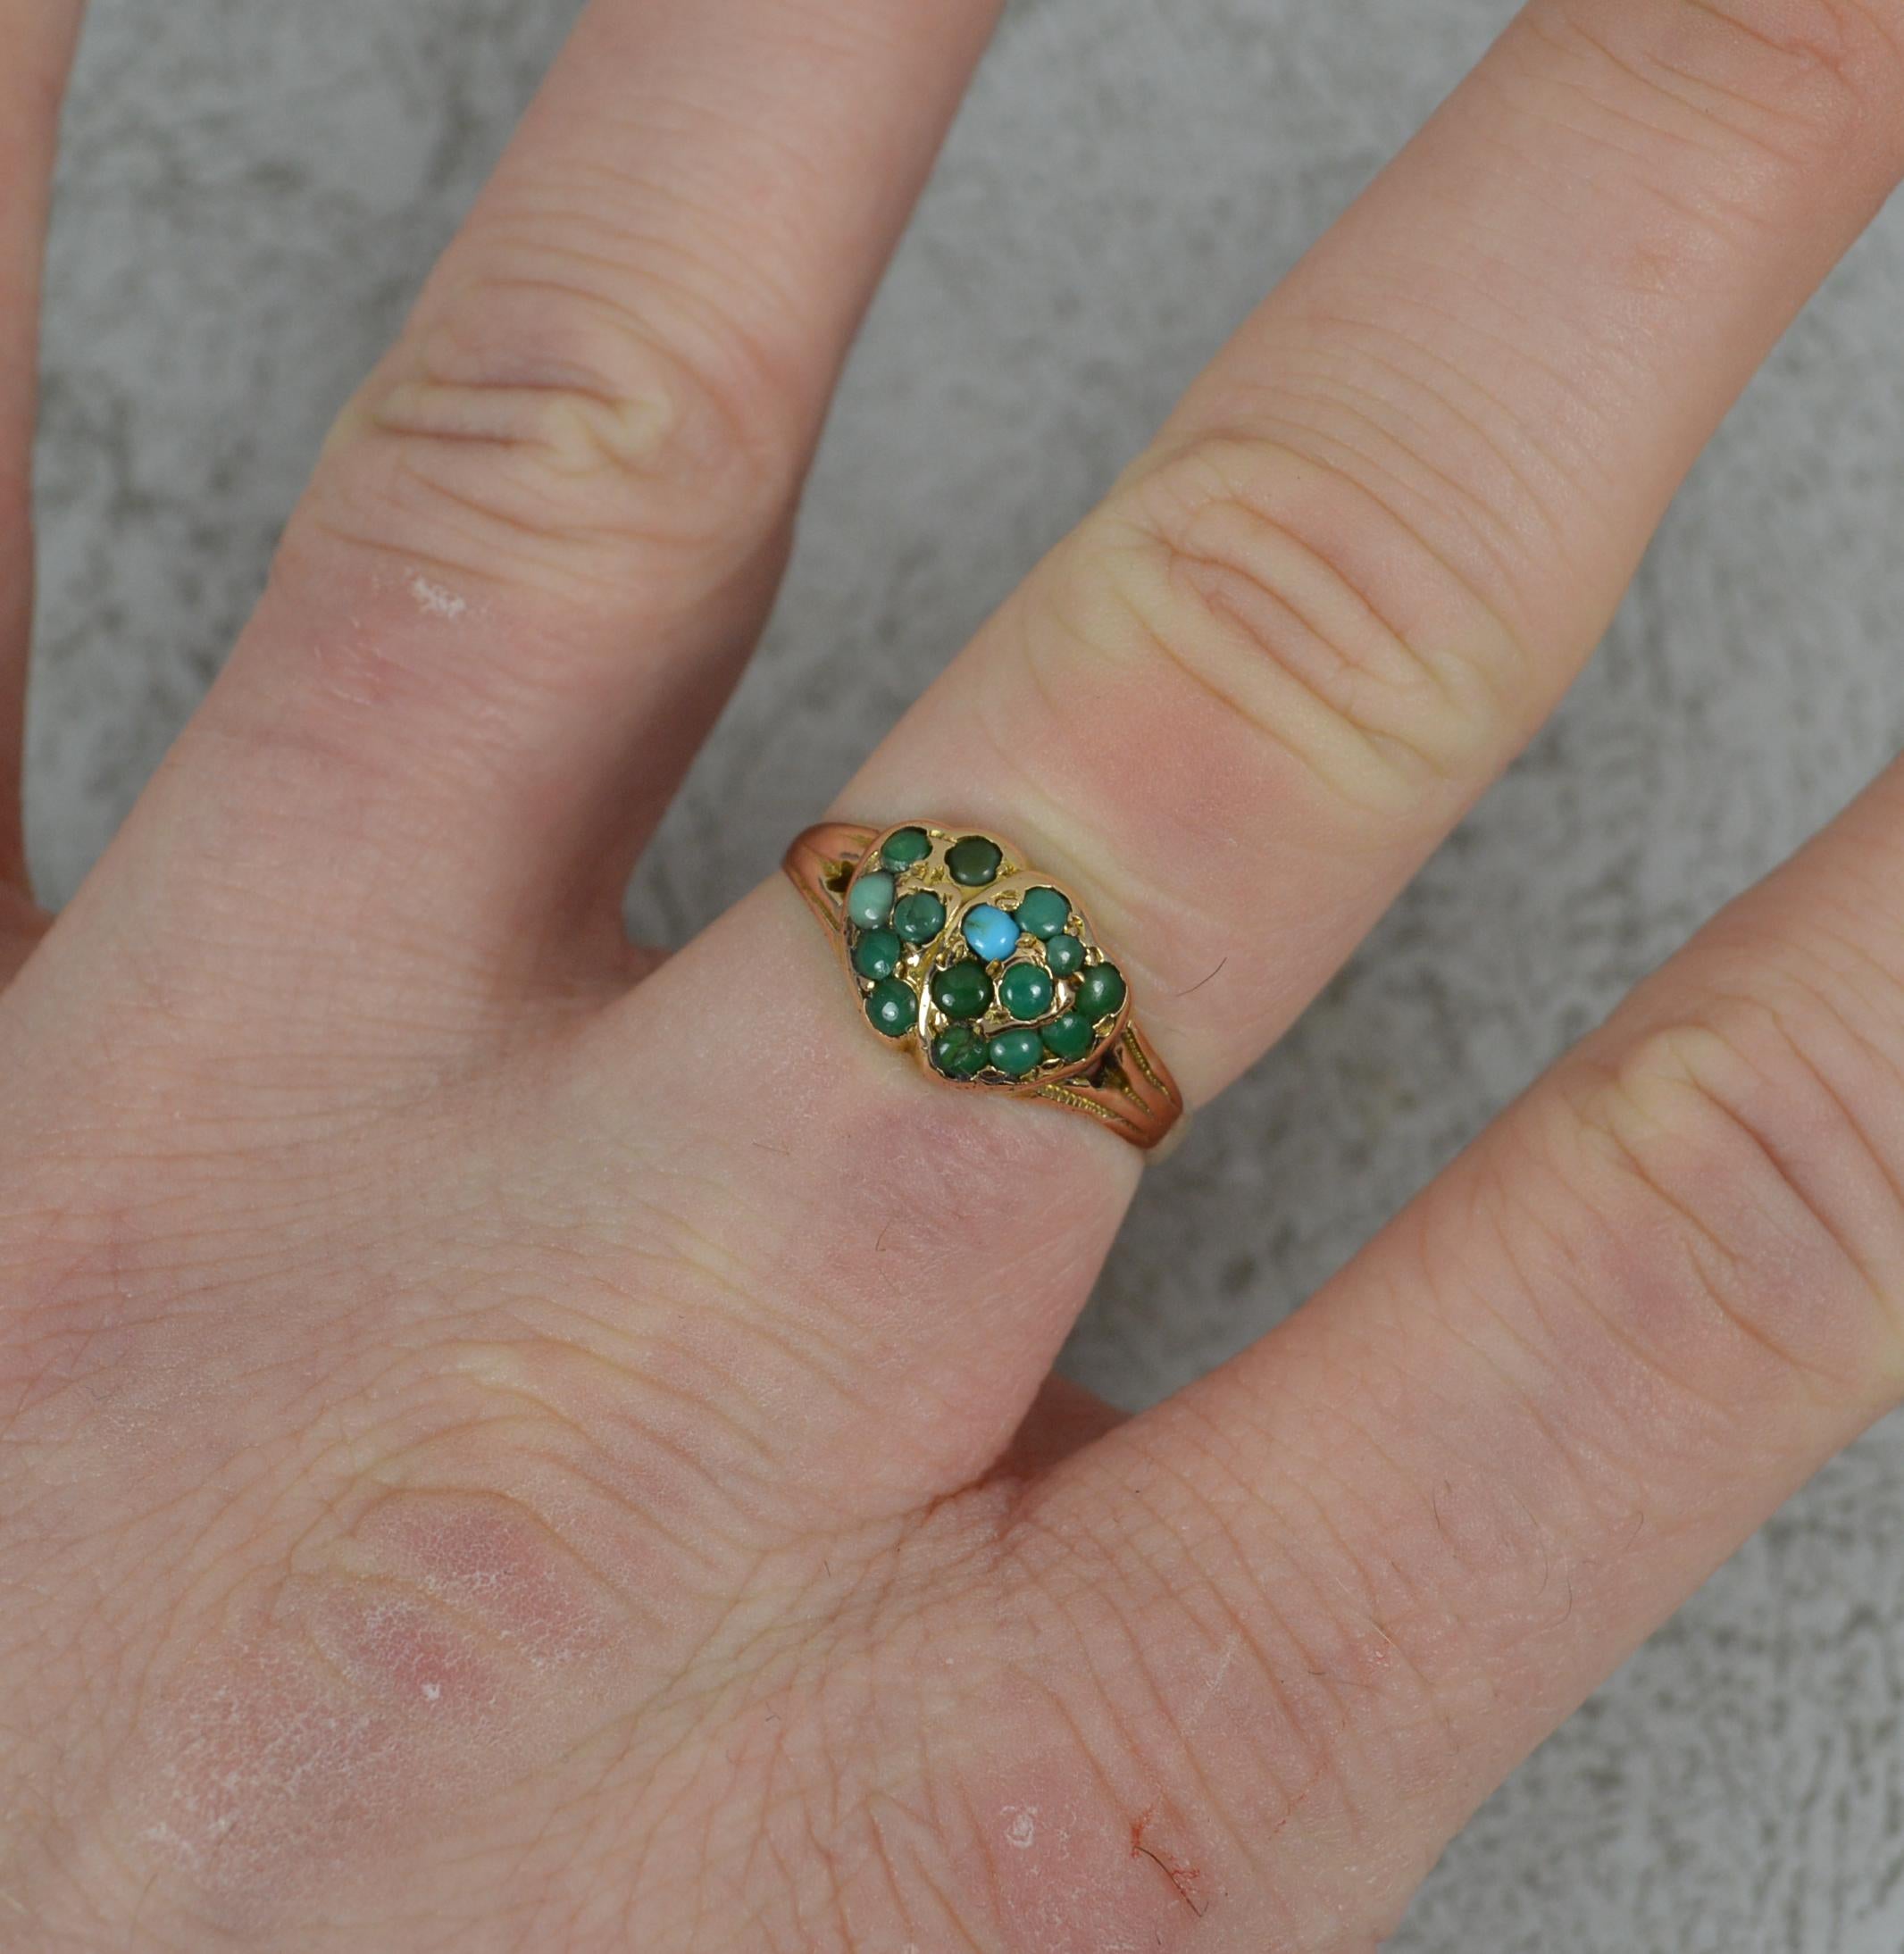 A superb Victorian era ring.
Solid 9 carat gold example.
Two heart design set with turquoise stones.
16mm x 8mm cluster head.

CONDITION ; Excellent. Well set stones. Clean, strong band. Issue free. Please view photographs.
WEIGHT ; 2.3 grams
SIZE ;